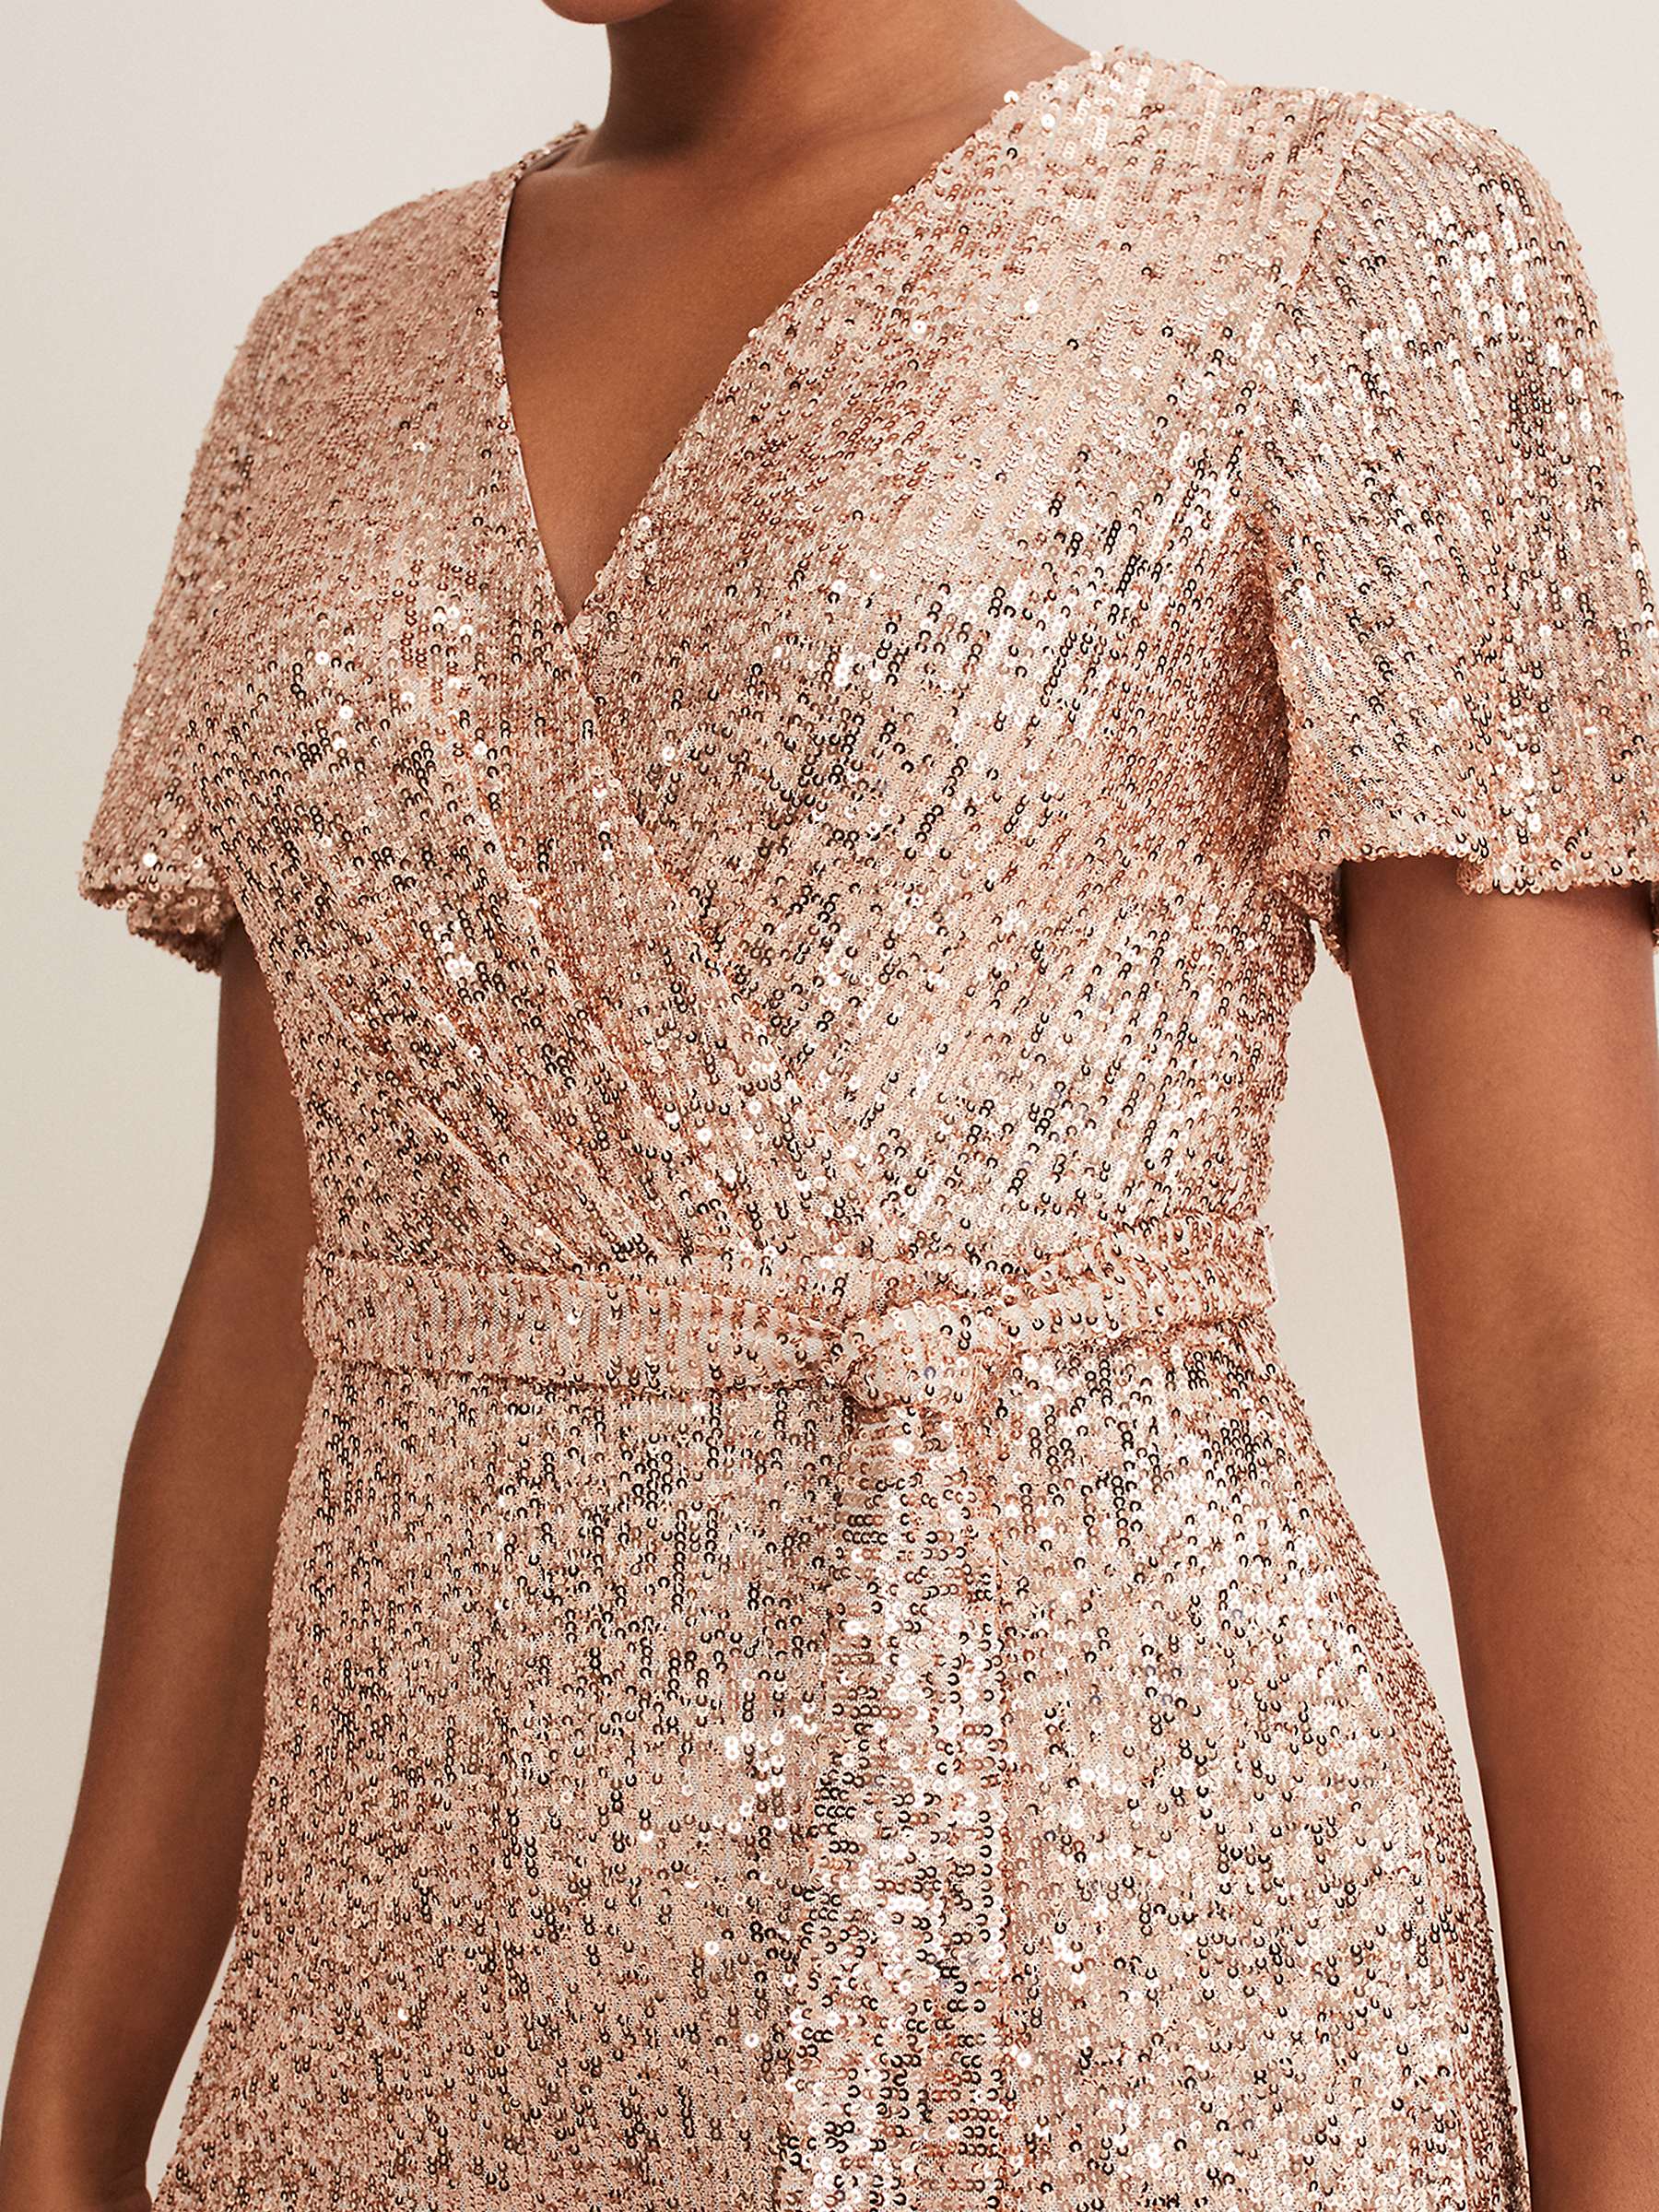 Buy Phase Eight Alessandra Sequin Jumpsuit Online at johnlewis.com